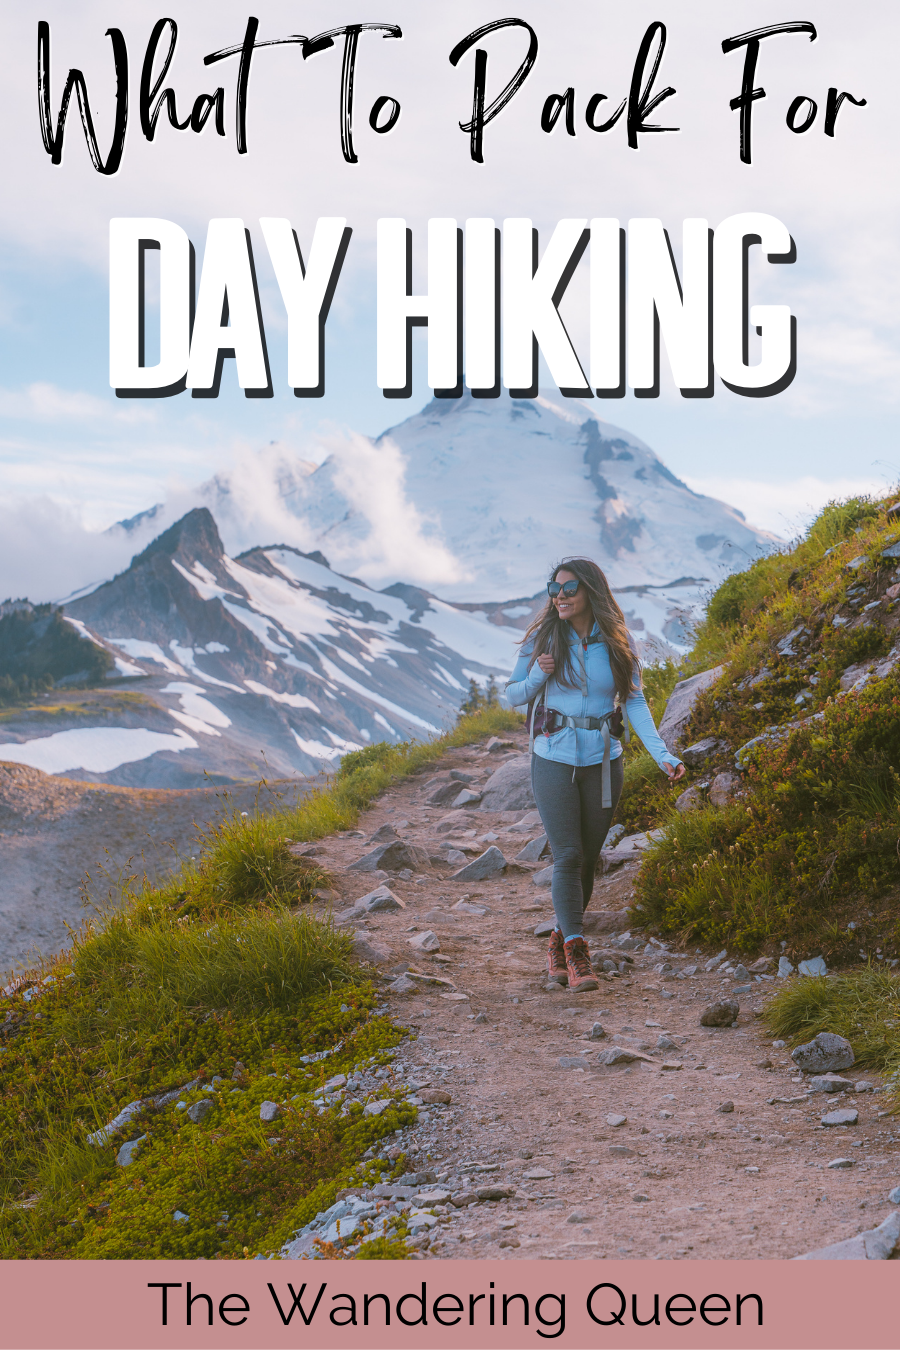 The Ten Essentials For Hiking and Camping - The Walking Mermaid